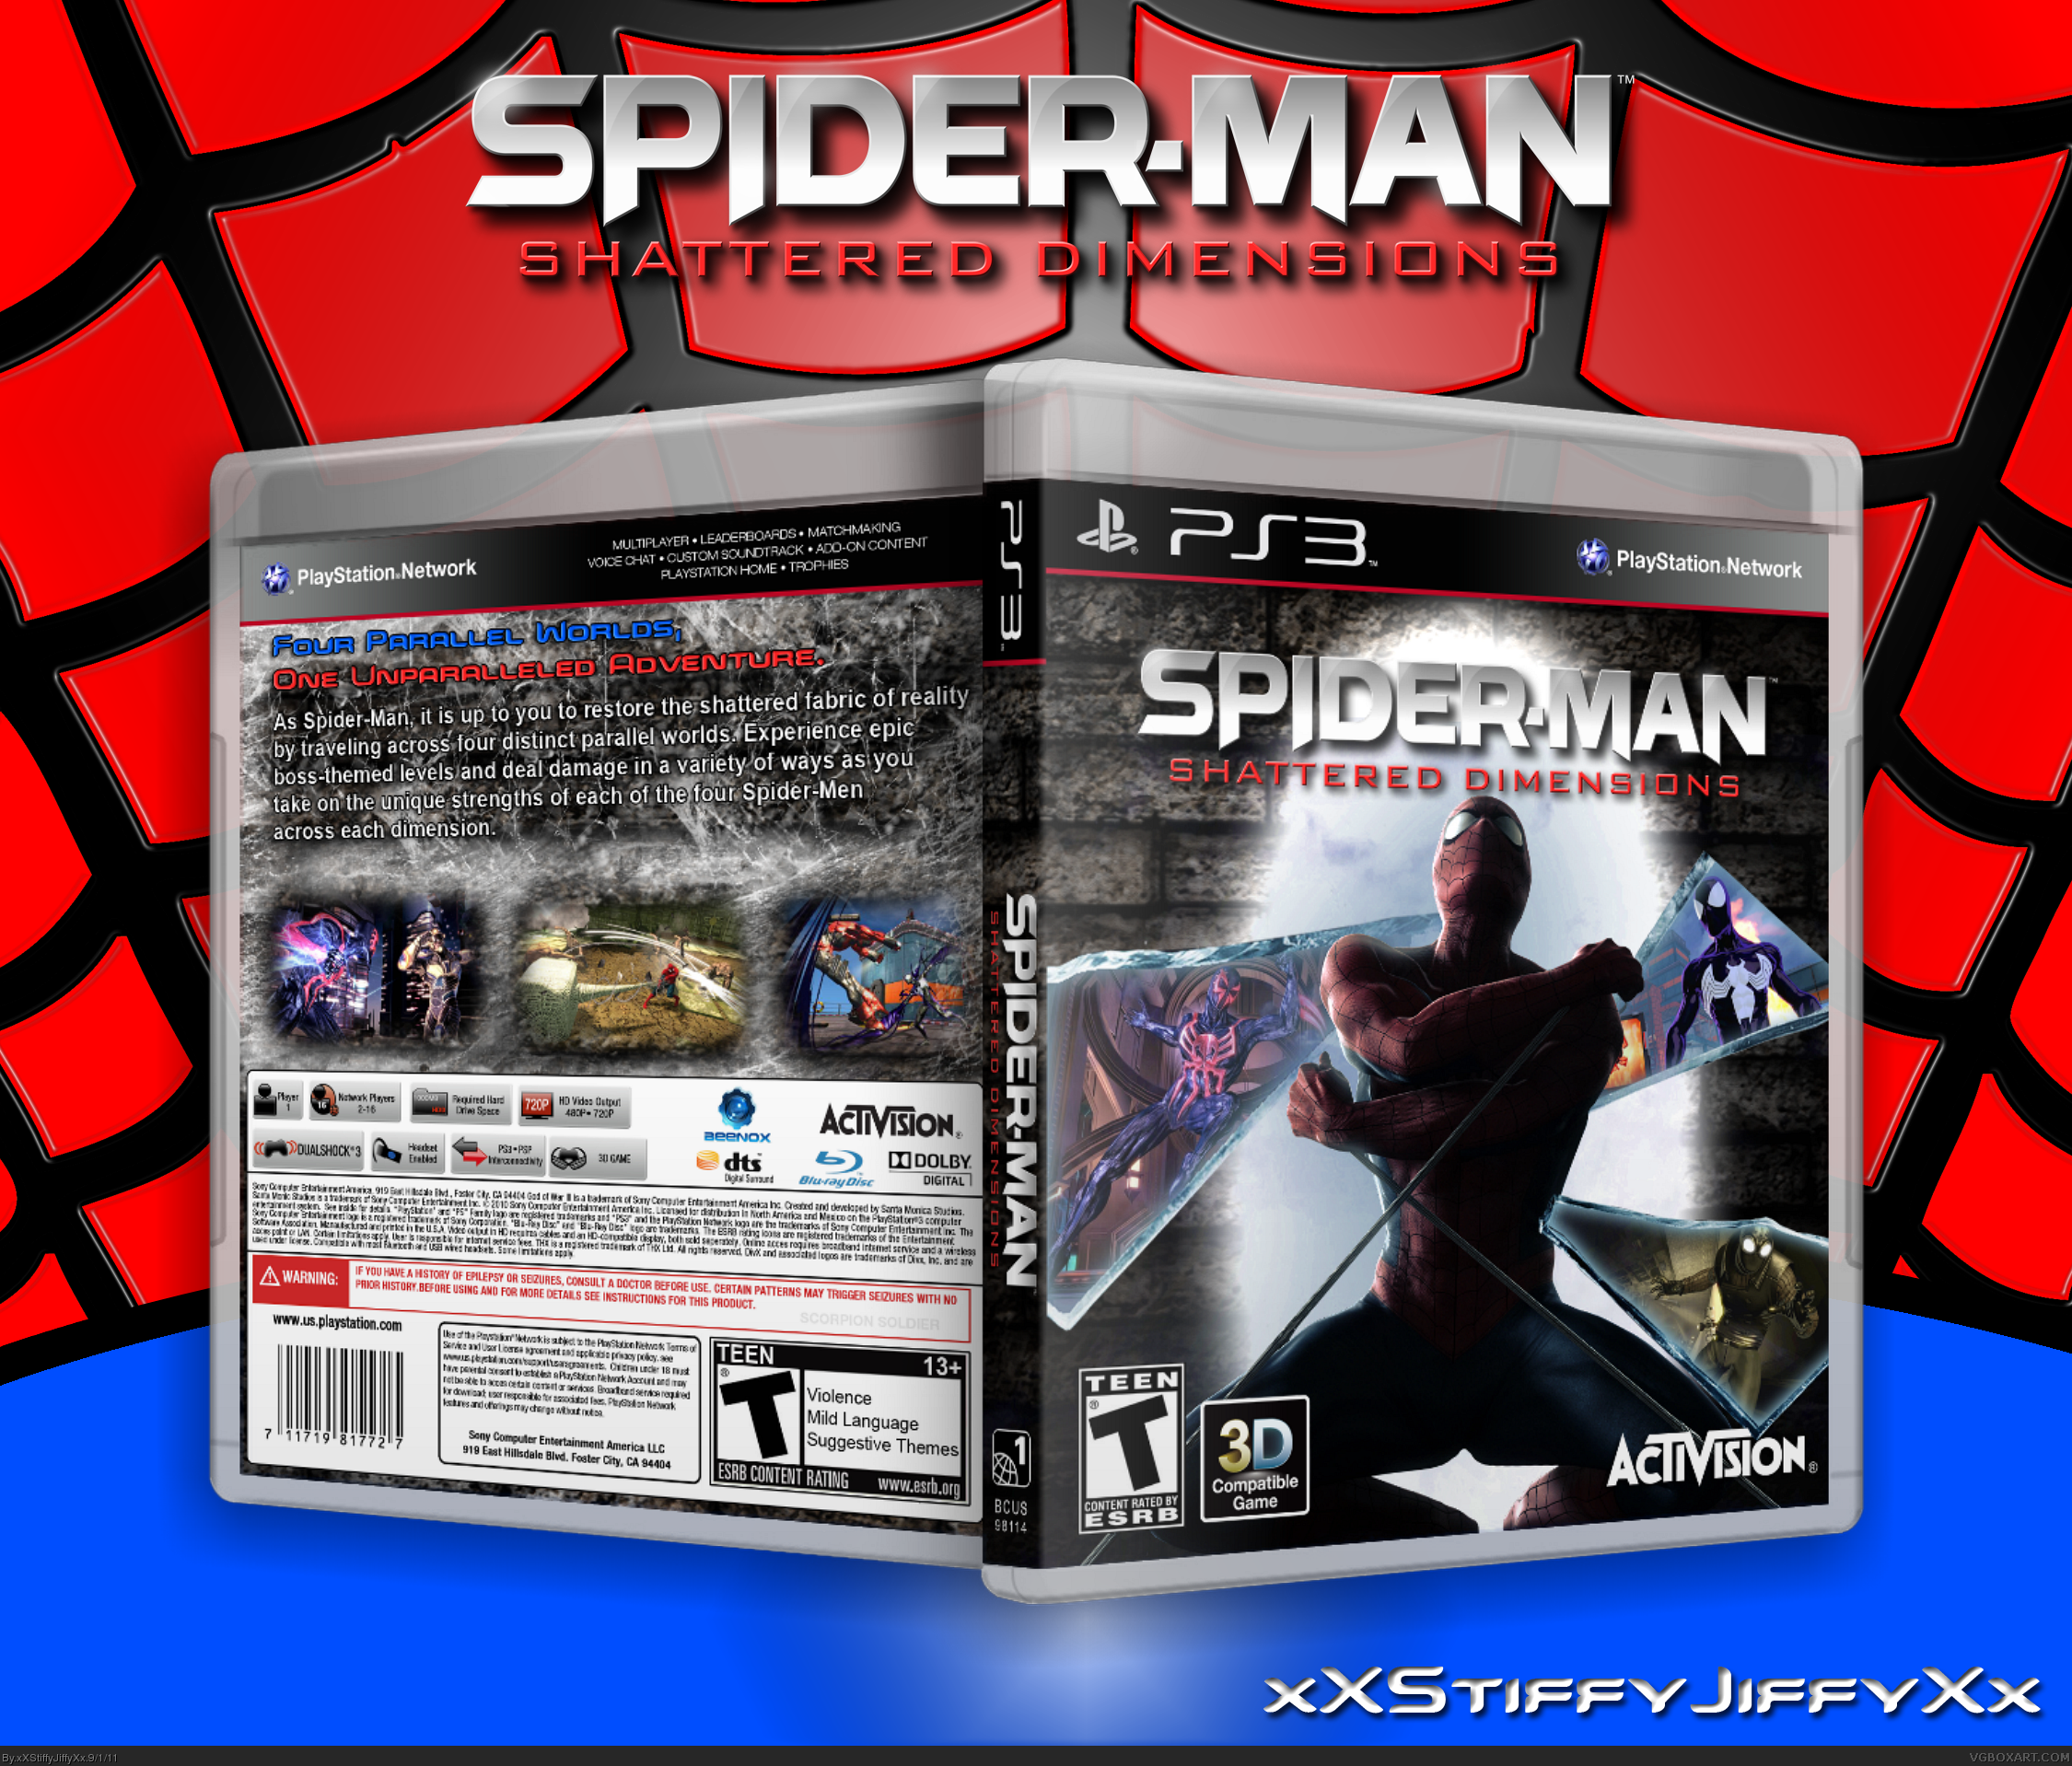 Spider-Man Shattered Dimensions PlayStation 3 Box Art Cover by